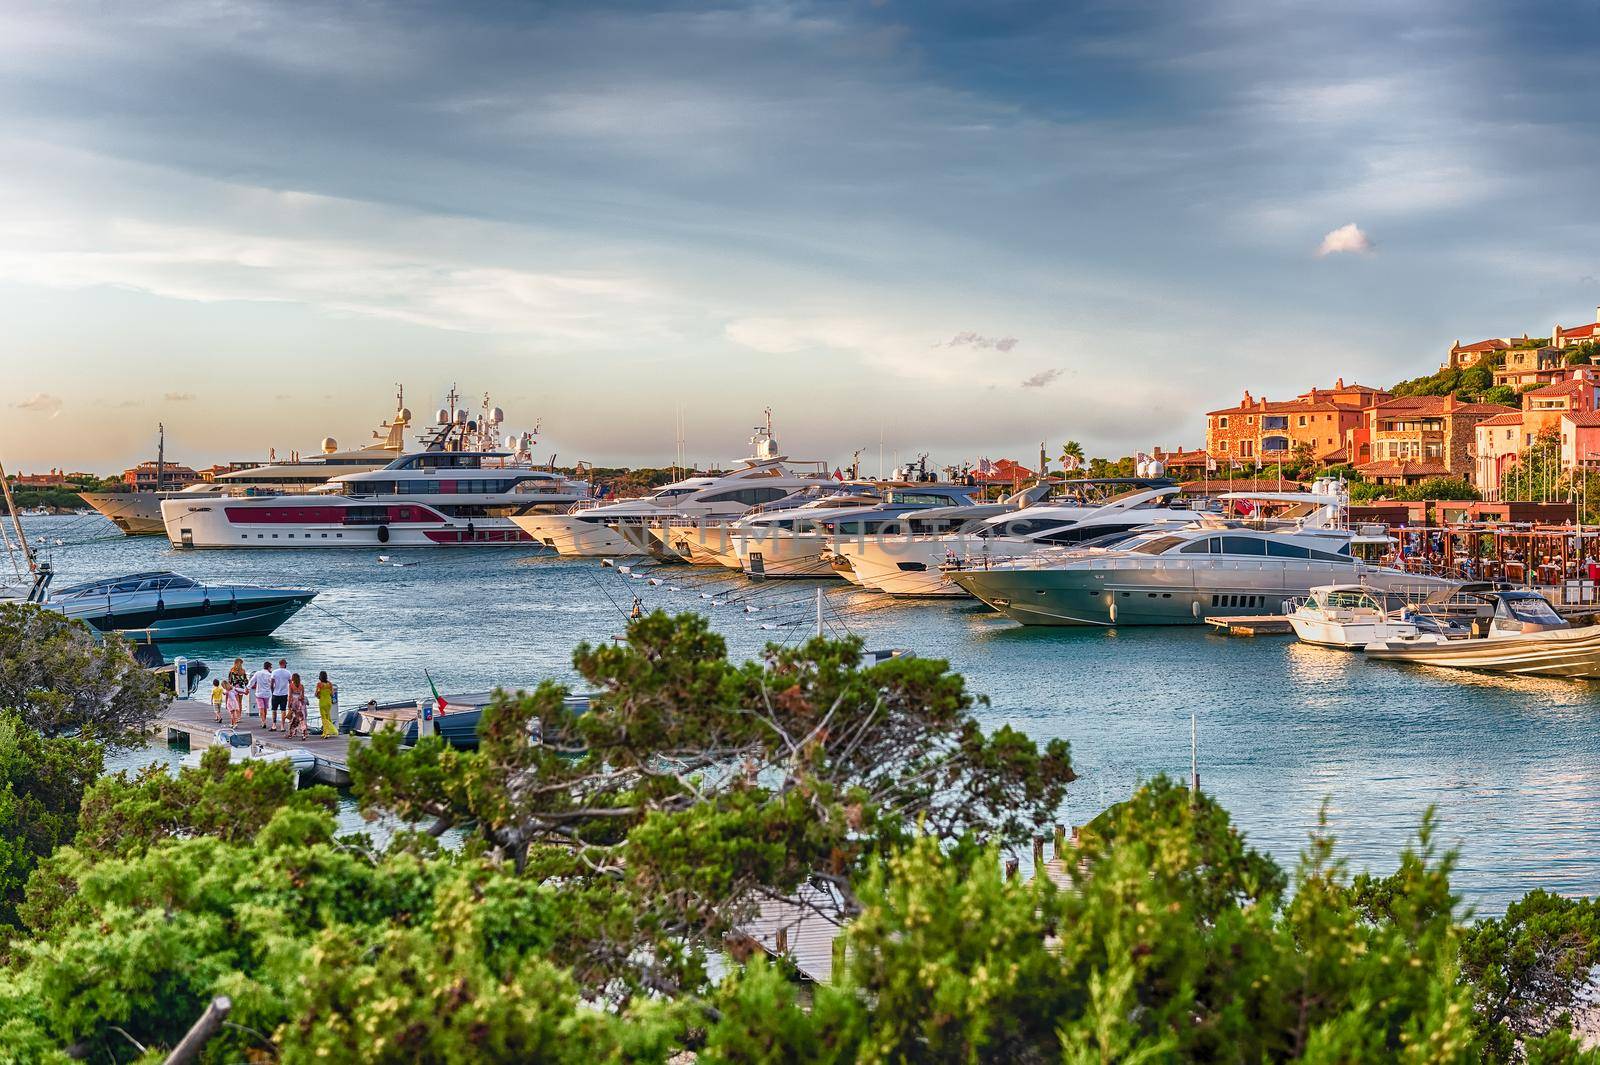 View of the harbor with luxury yachts of Porto Cervo, Sardinia, Italy. The town is a worldwide famous resort and a luxury yacht magnet and billionaires' playground